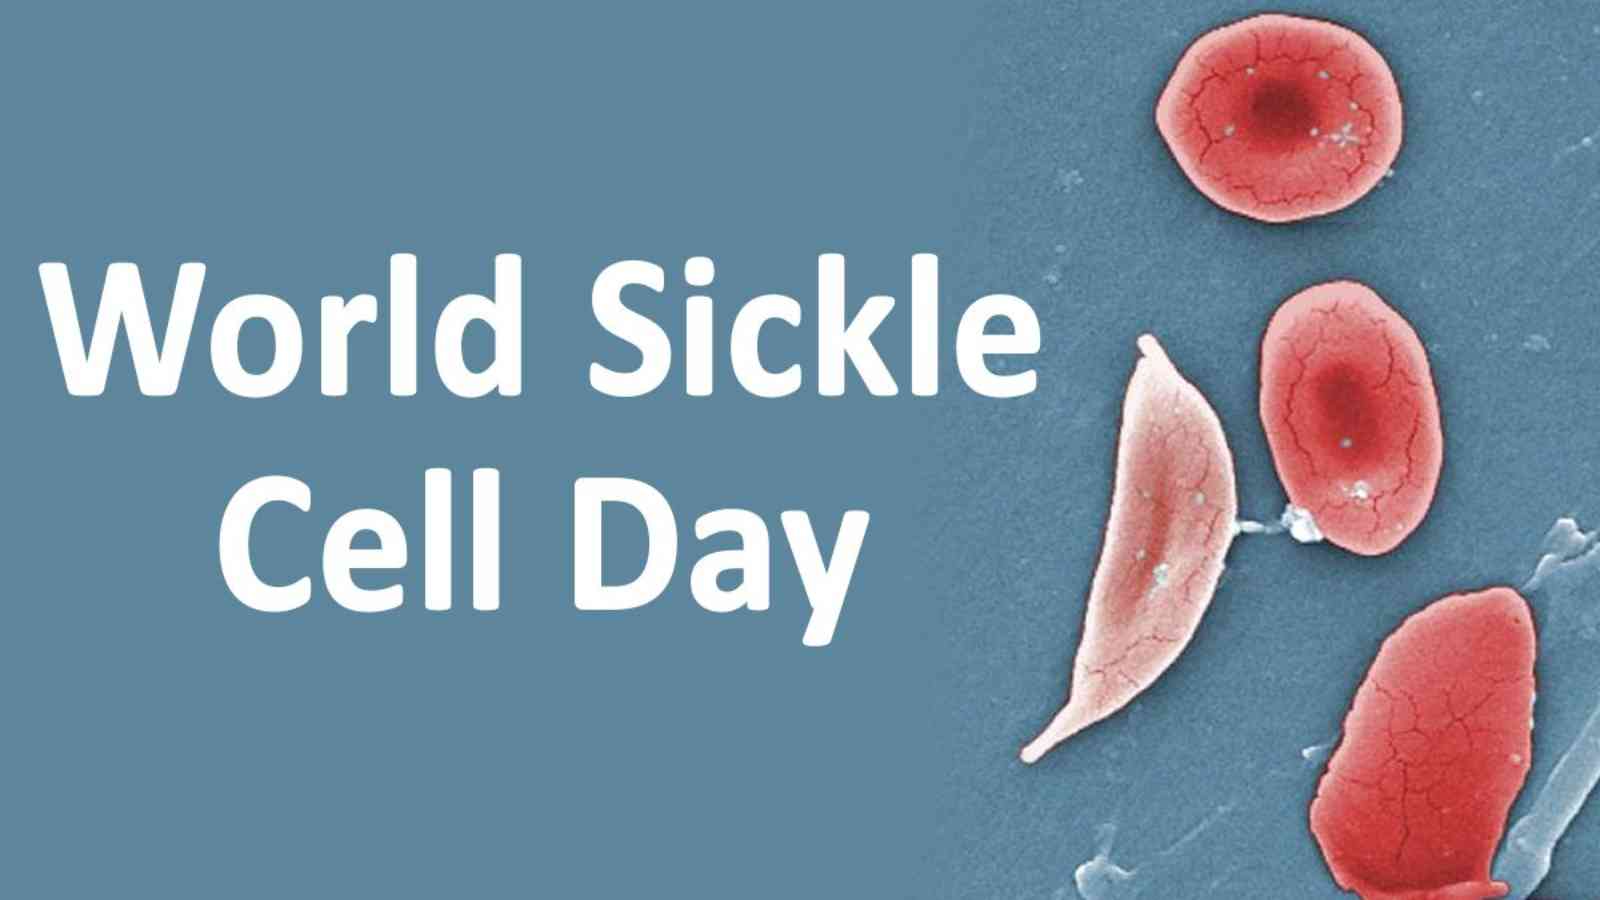 World Sickle Cell Day 2022: Date, Causes and Treatment